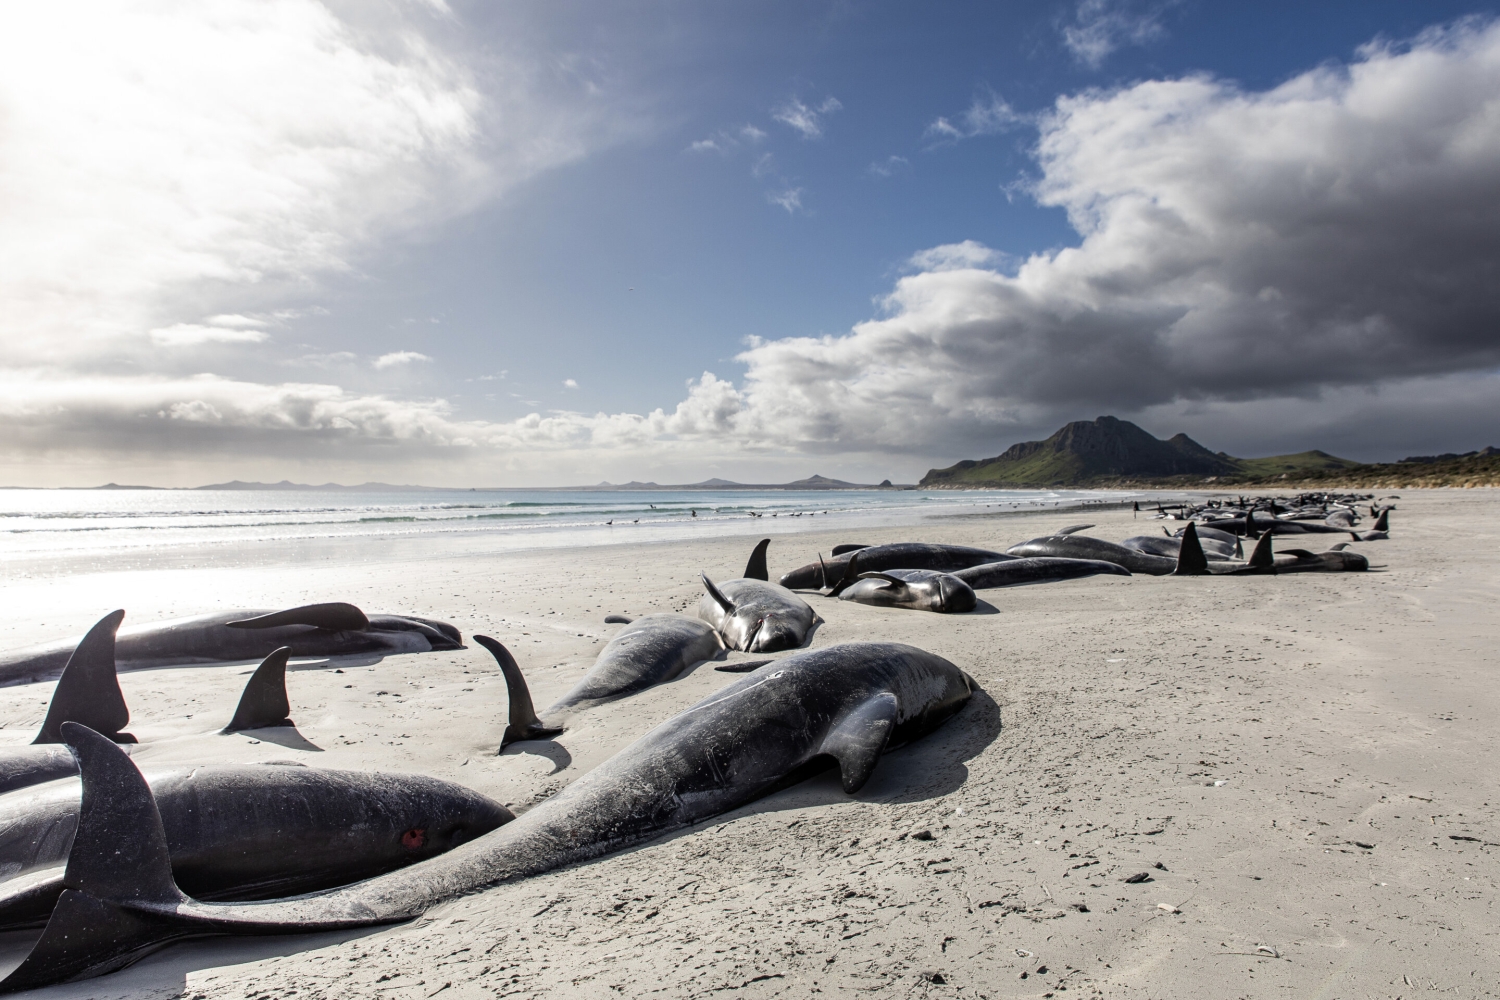 450+ whales die after beaching themselves in a 'heartbreaking' loss